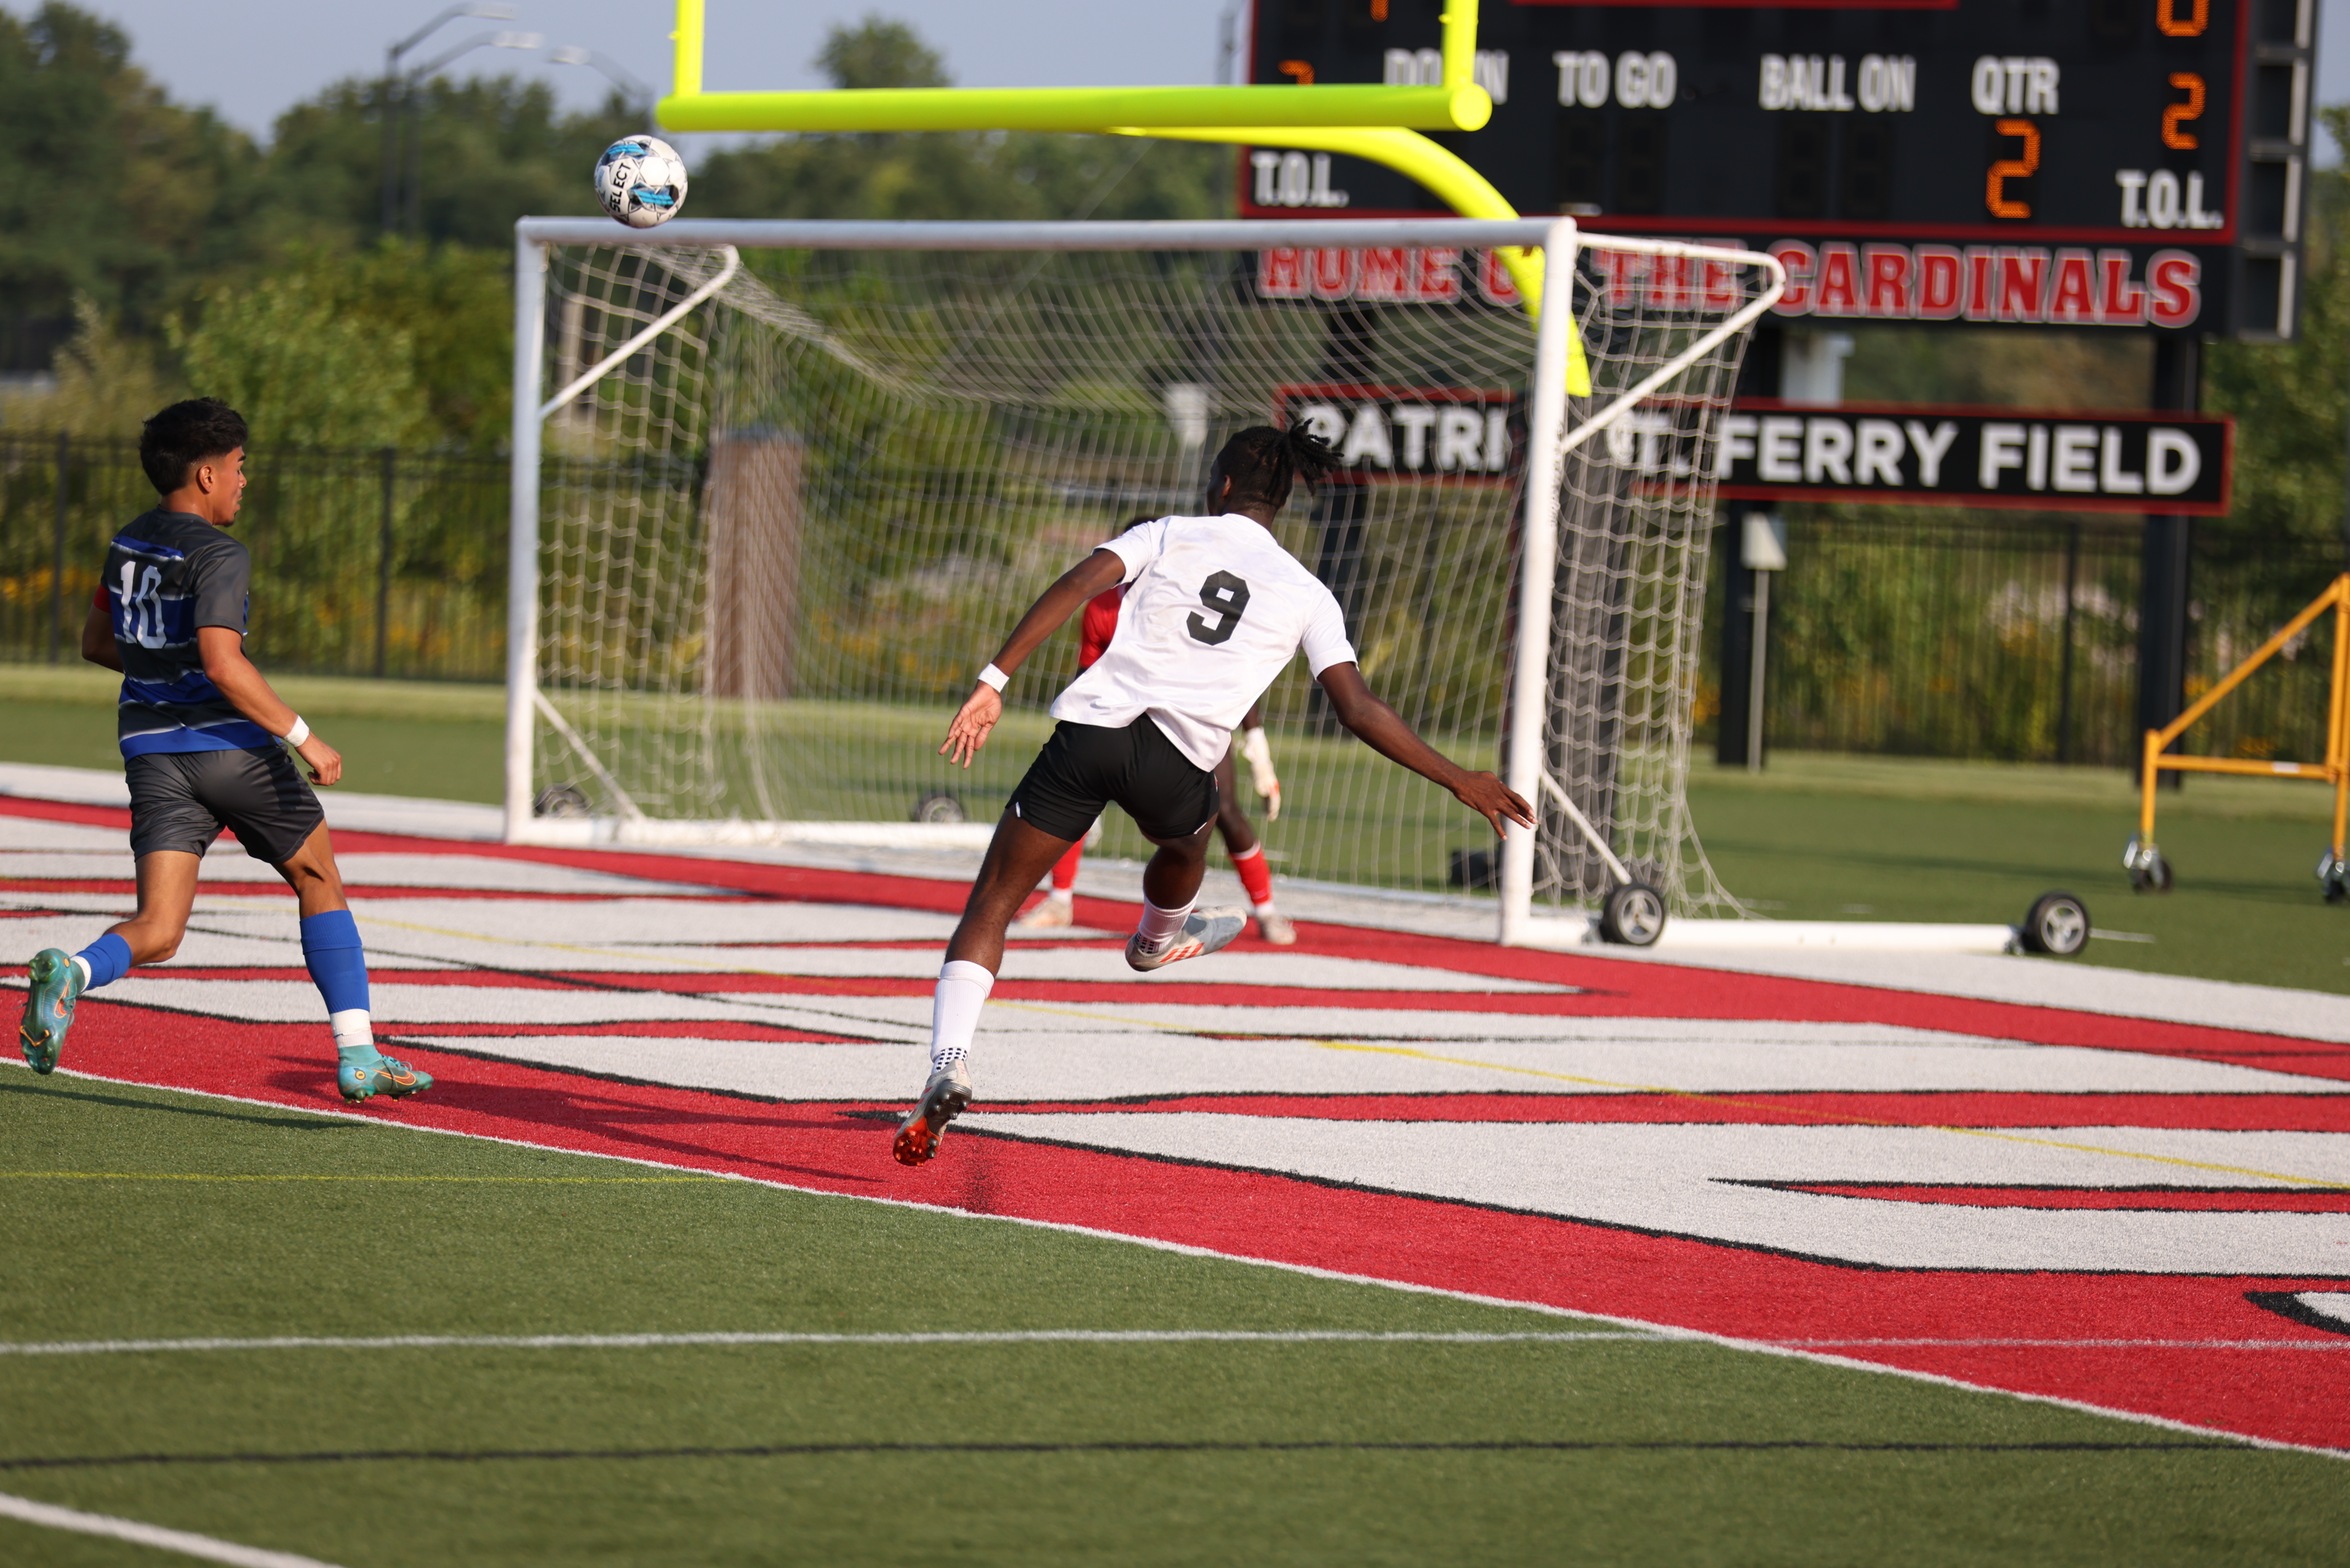 Men's Soccer draws 3-3 with Cleary